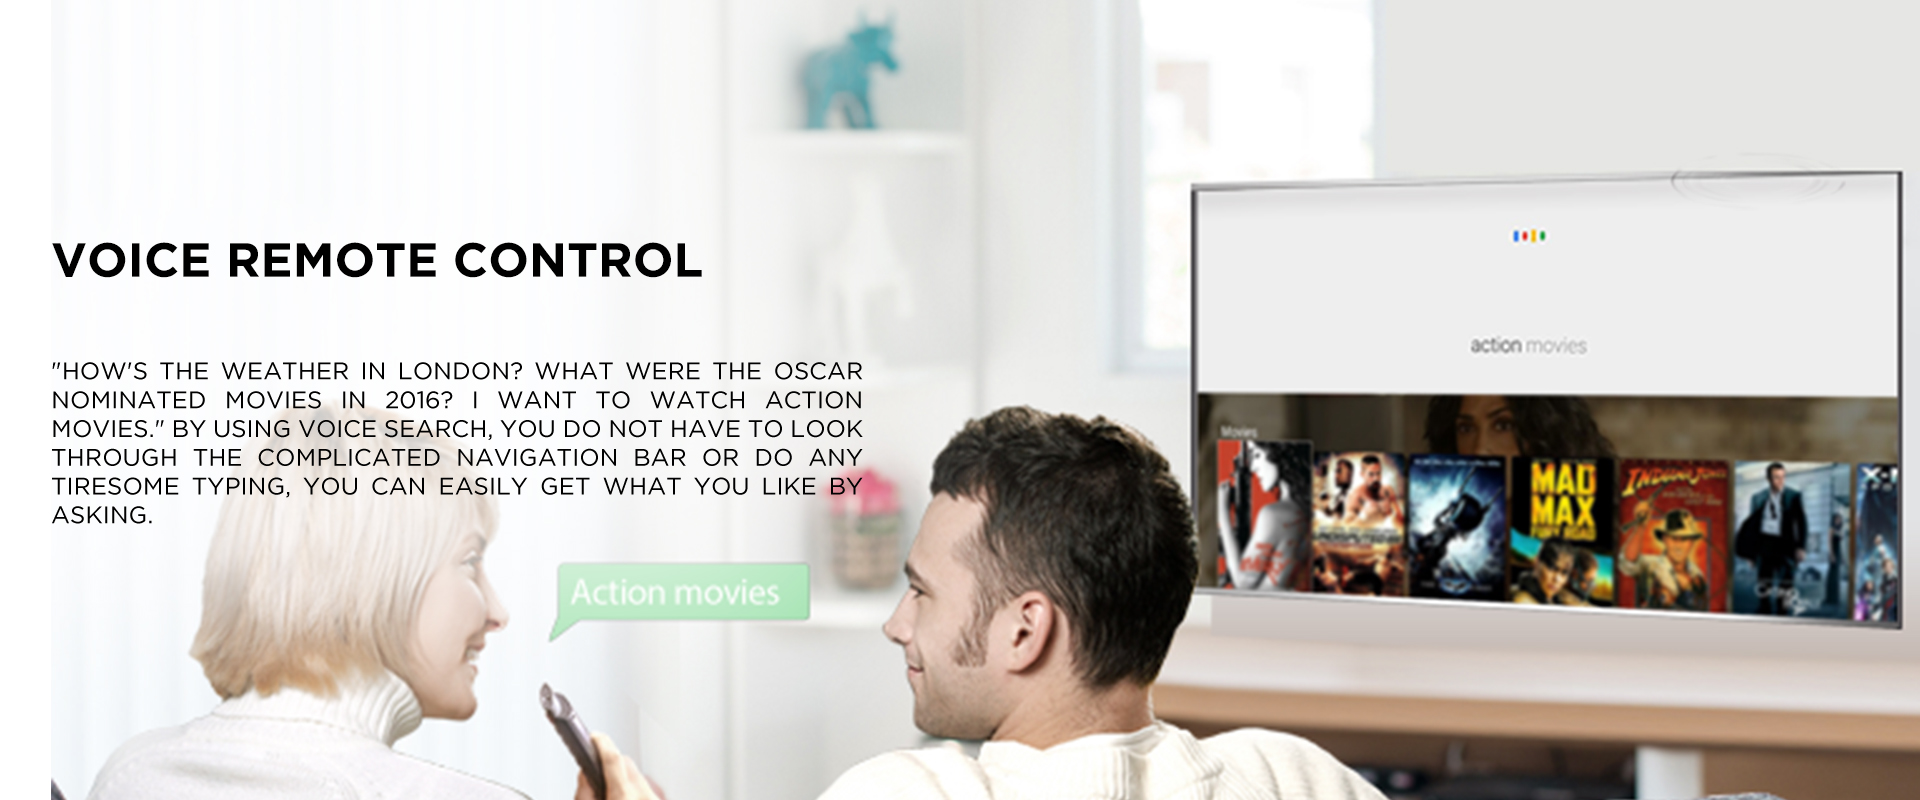 VOICE REMOTE CONTROL - HOW'S THE WEATHER IN LONDON? WHAT WERE THE OSCAR NOMINATED MOVIES IN 2016? I WANT TO WATCH ACTION MOVIES. BY USING VOICE SEARCH, YOU DO NOT HAVE TO LOOK THROUGH THE COMPLICATED NAVIGATION BAR OR DO ANY TIRESOME TYPING, YOU CAN EASILY GET WHAT YOU LIKE BY ASKING.